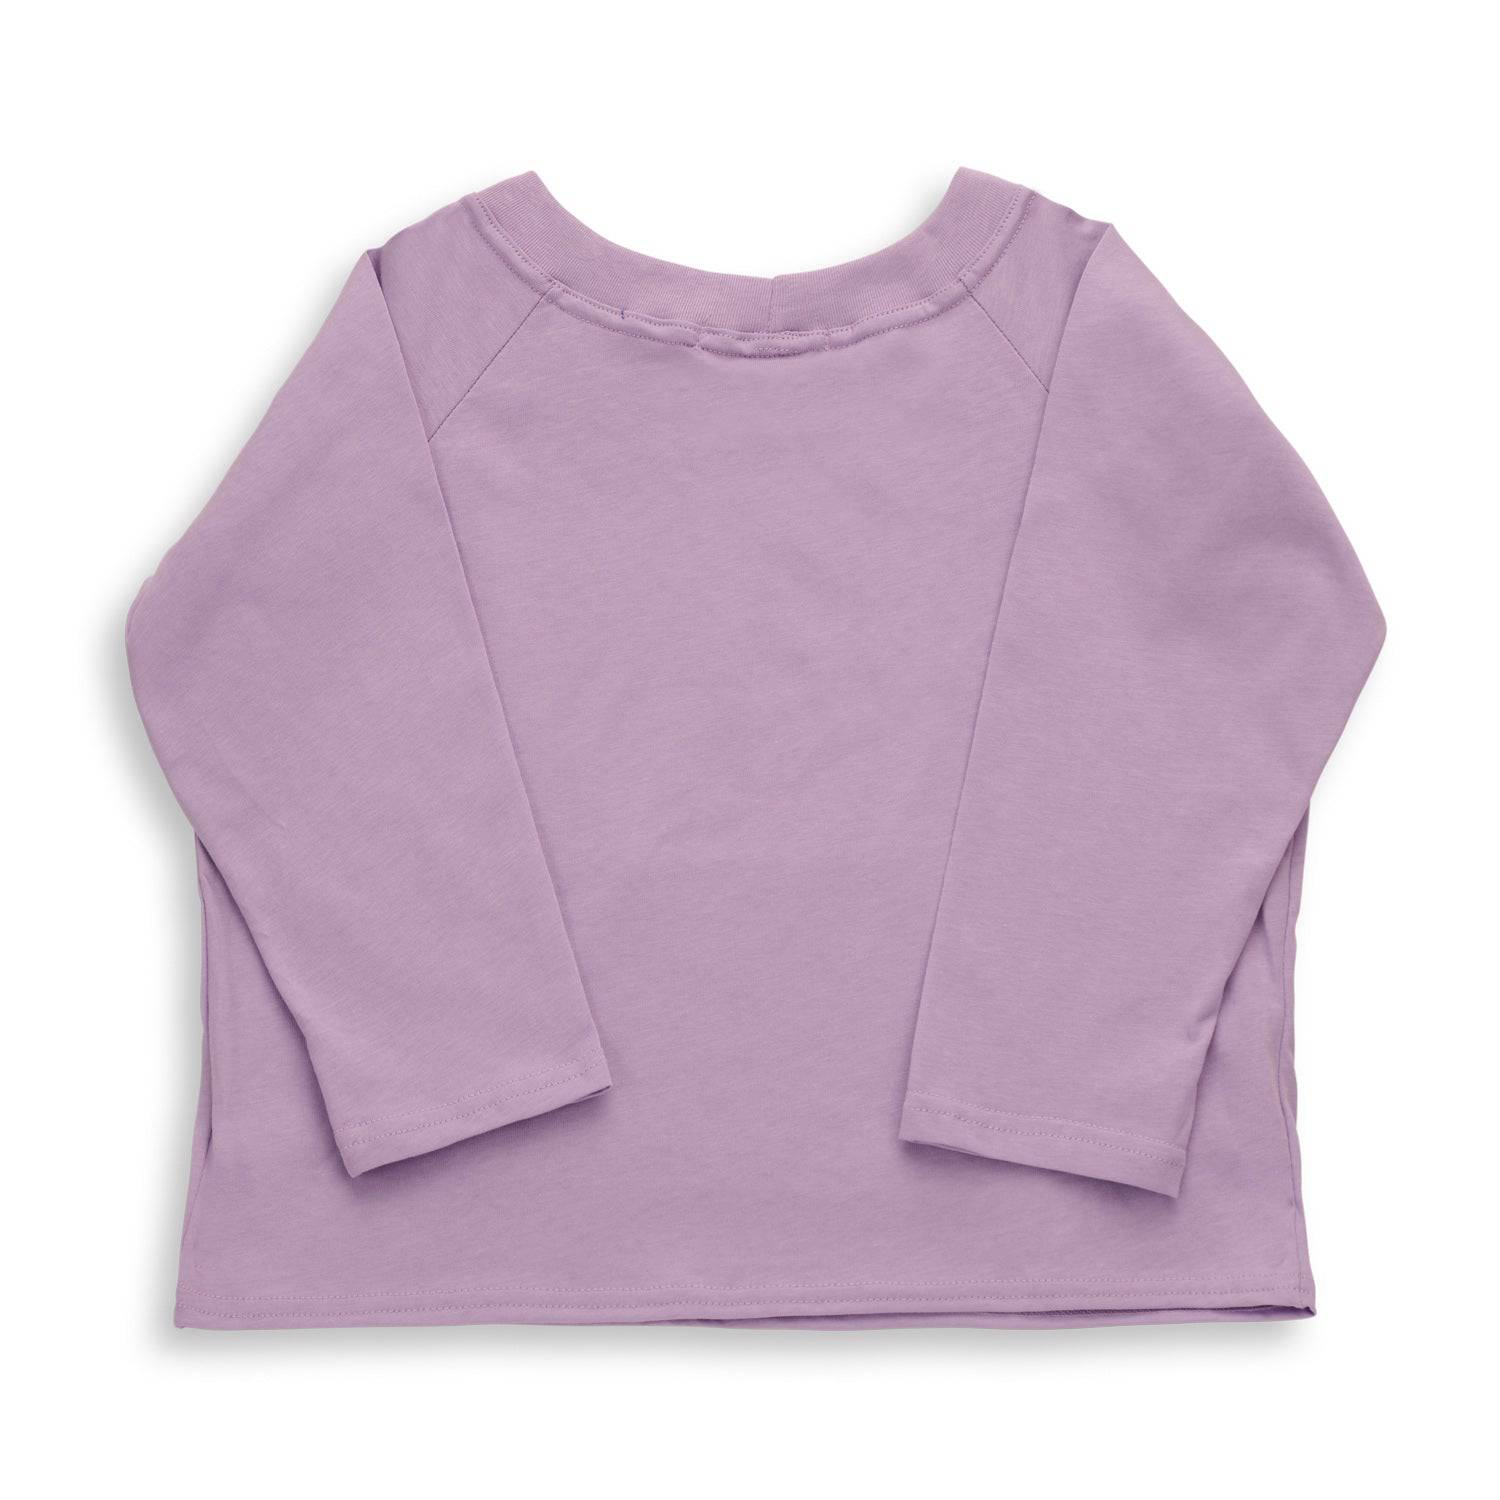 The Boat T-Shirts (girls - purple) - CooCootales